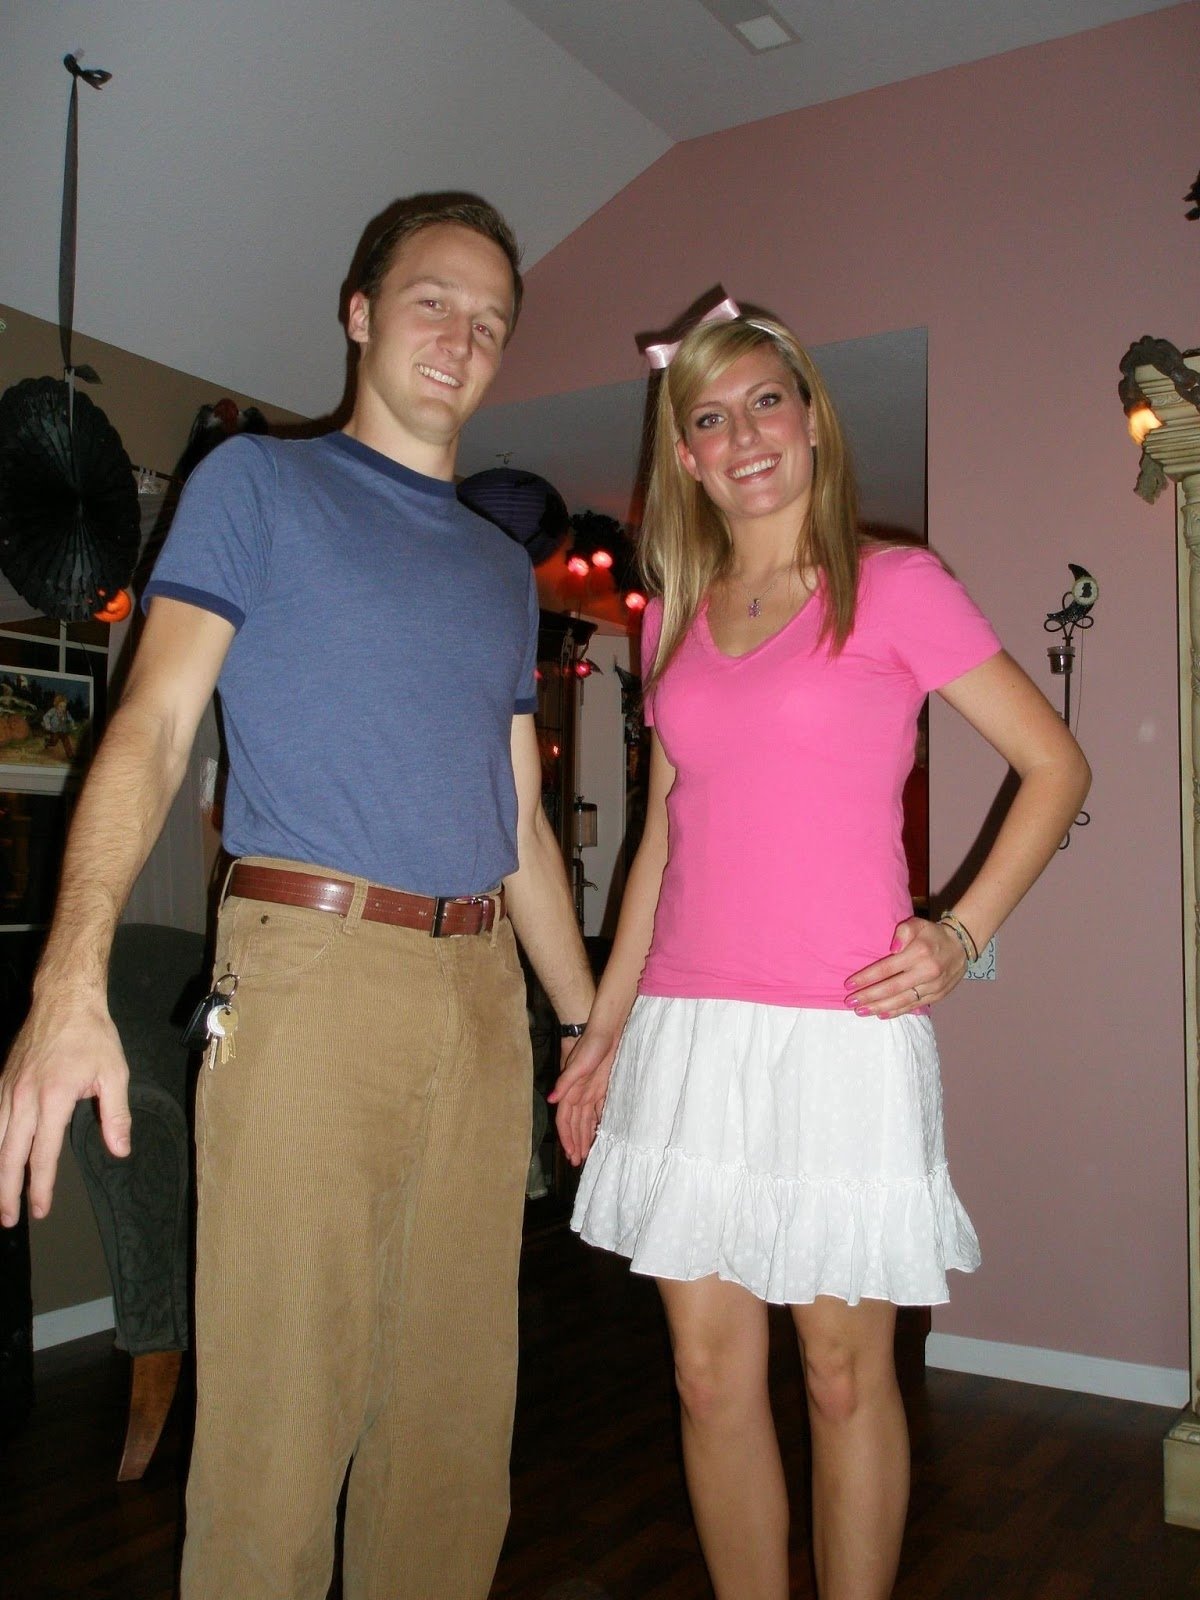 10 Gorgeous Halloween Costume Ideas For Adults 2013 katie in kansas diy couples halloween costume ideas 2 2022